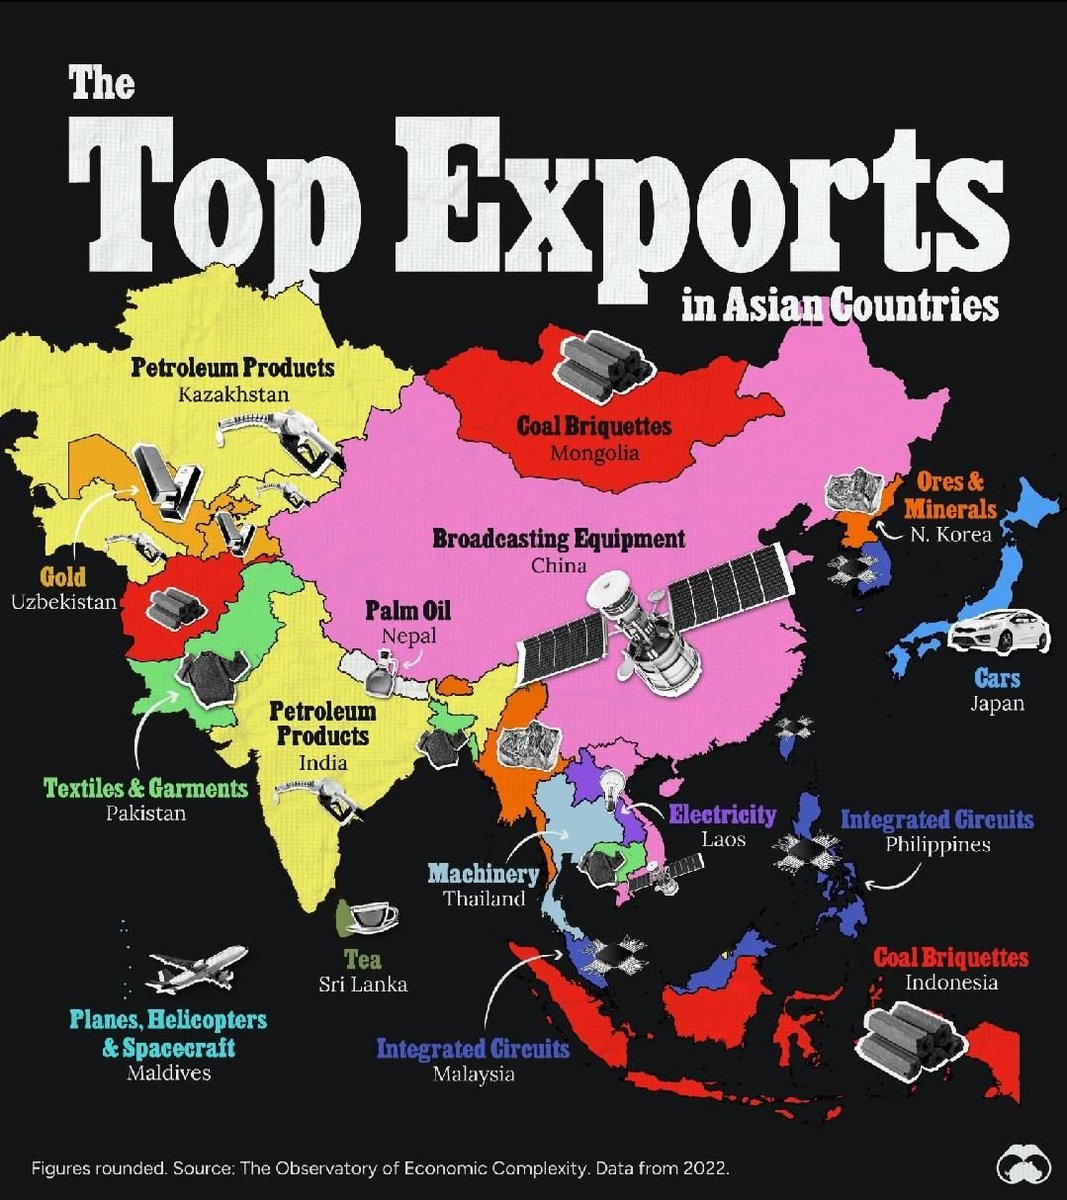 The top exports in Asian countries.